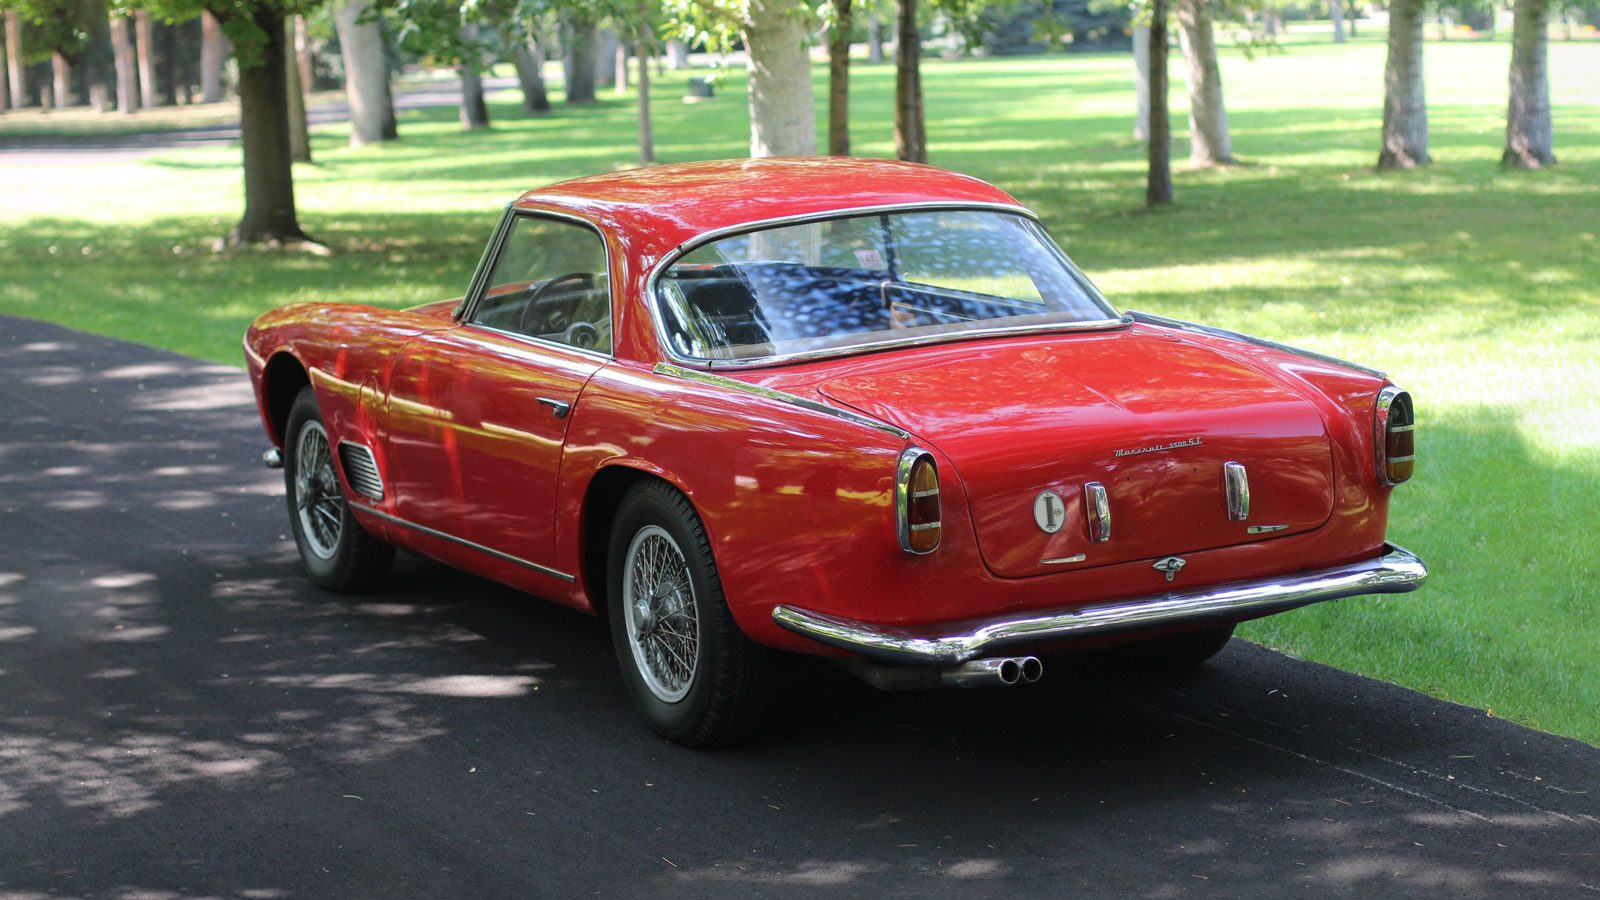 Sell your Maserati 3500GT To Classic Investments